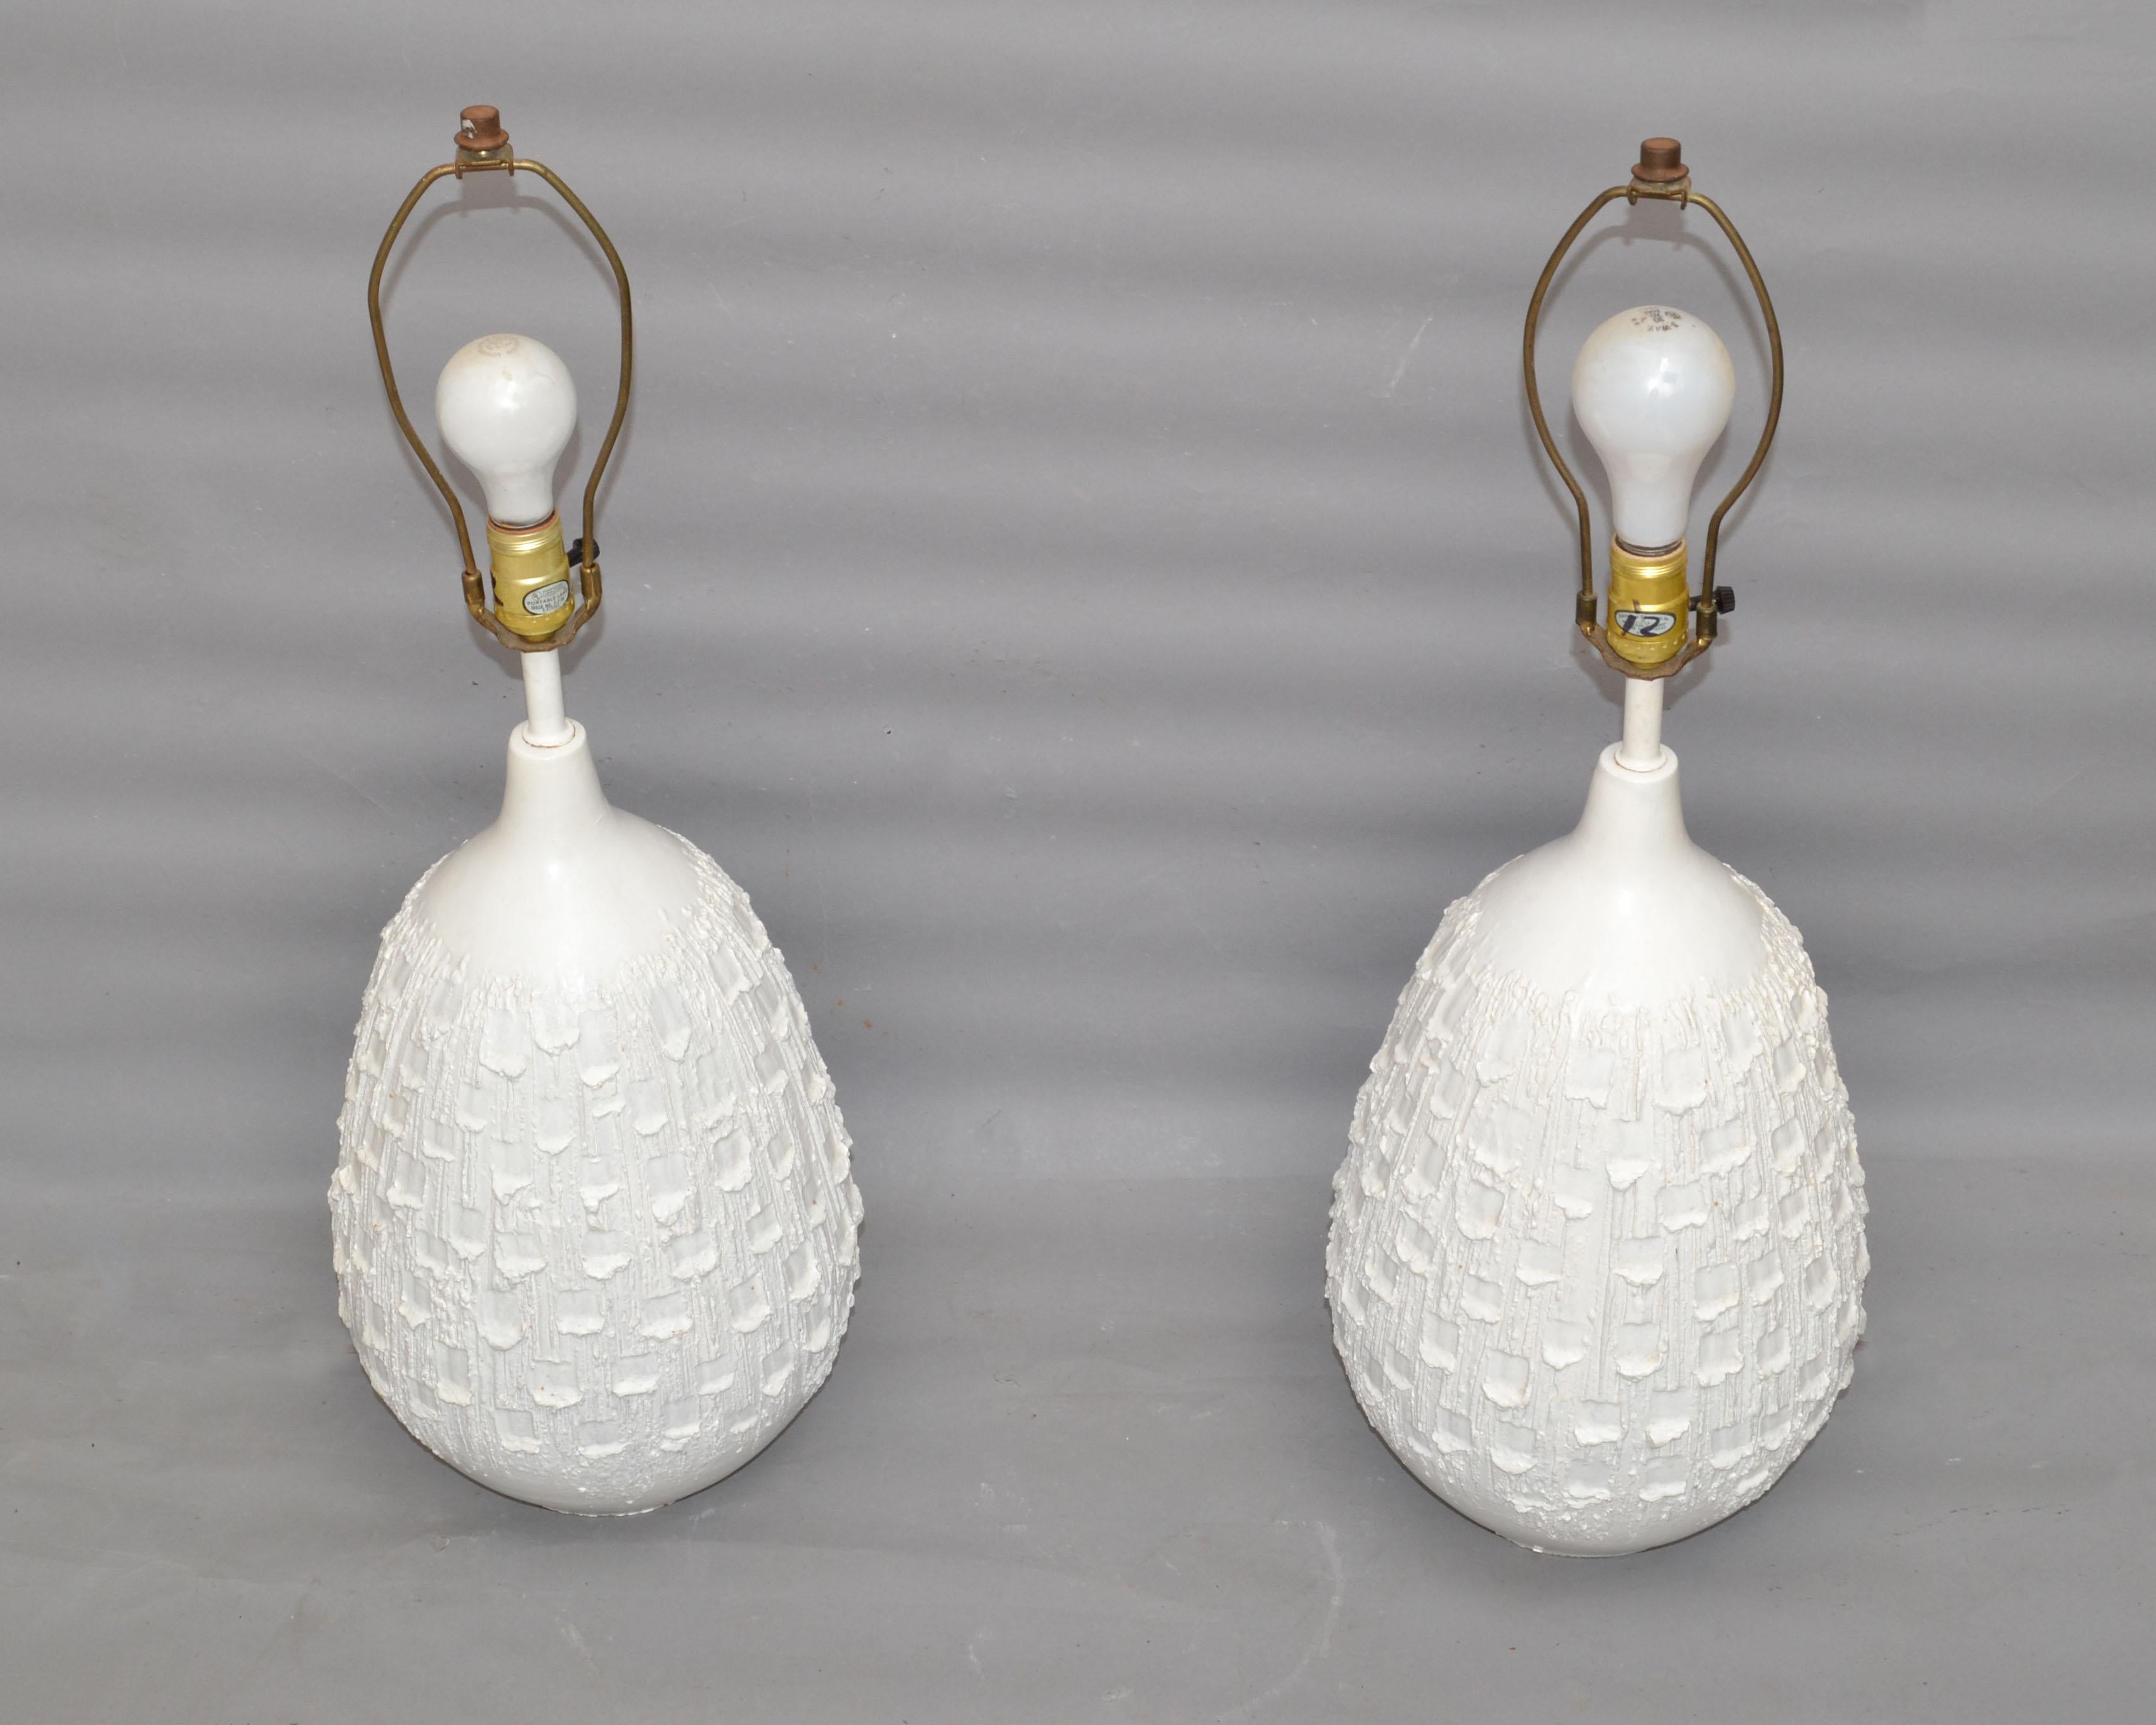 Pair of Mid-Century Modern White Ceramic Table Lamps In Good Condition For Sale In Miami, FL